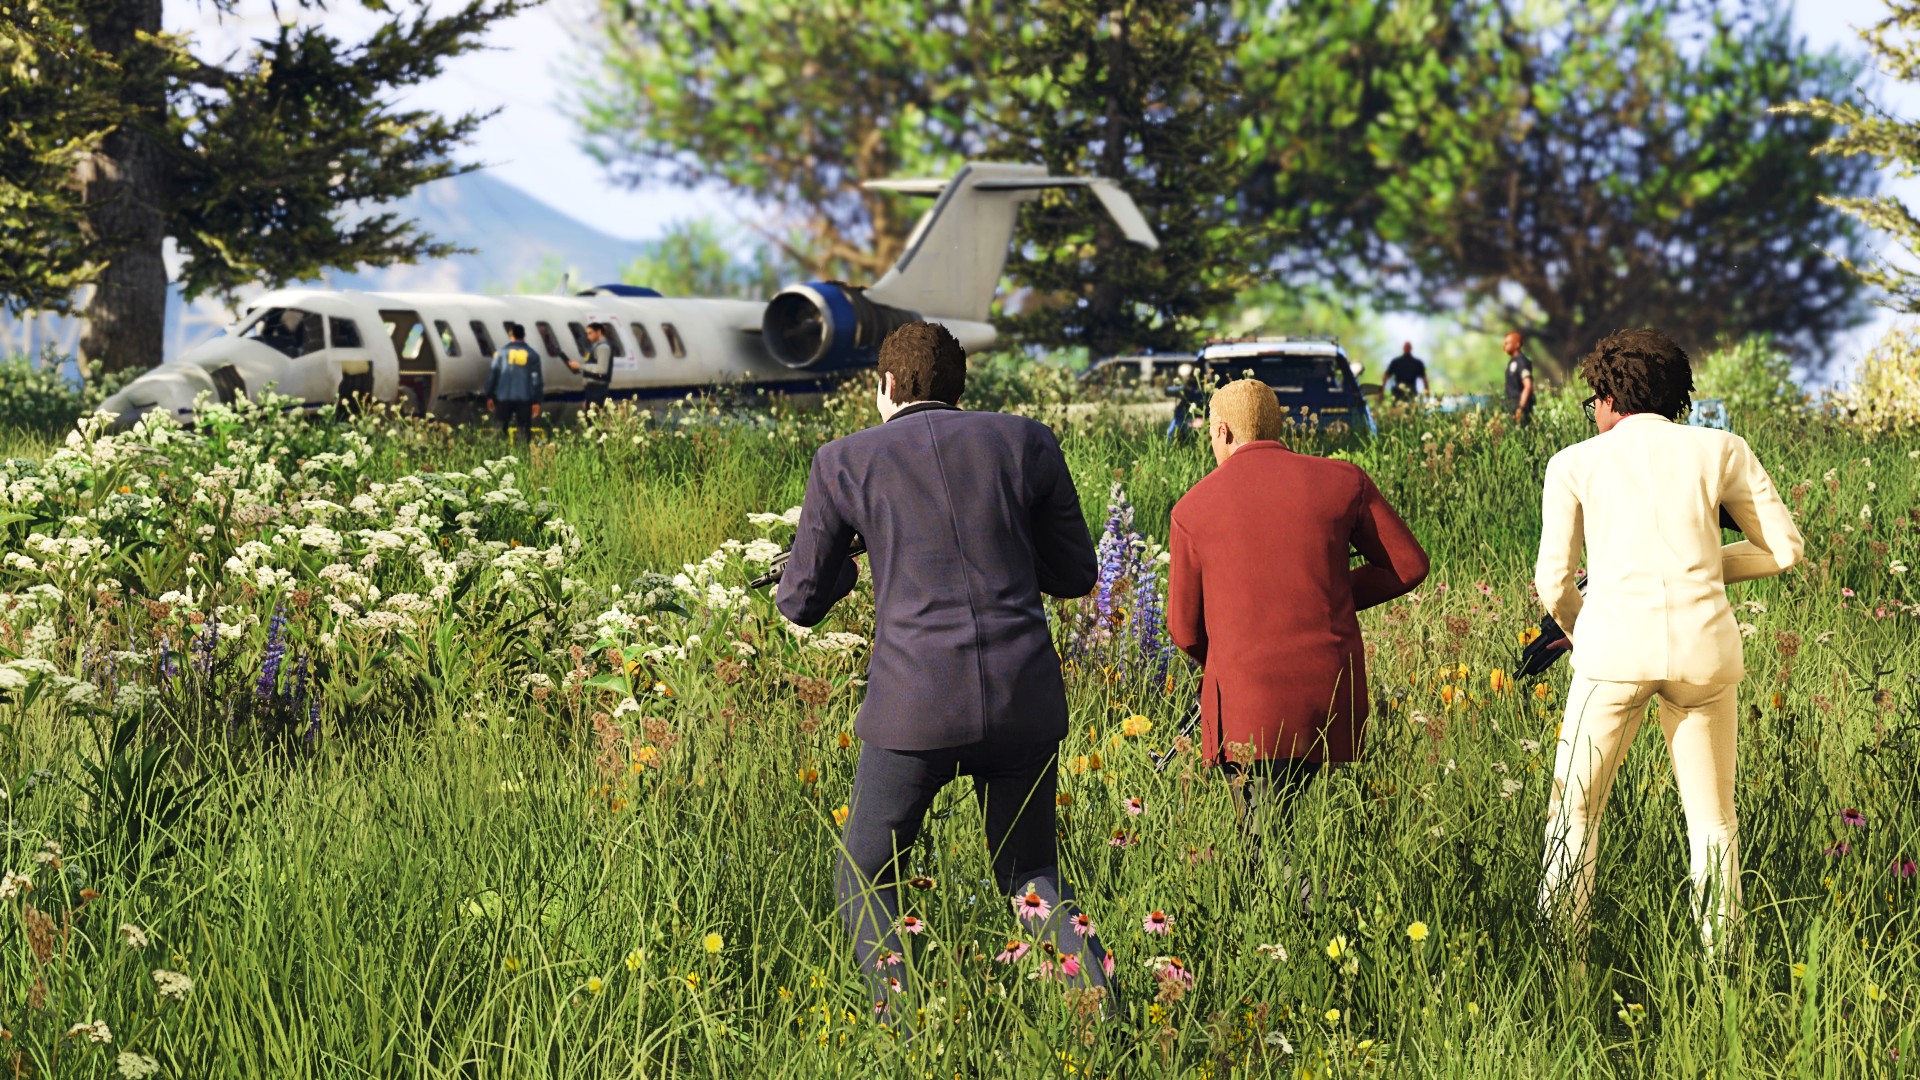 GTA Online’s weekly update adds seven new Survival modes